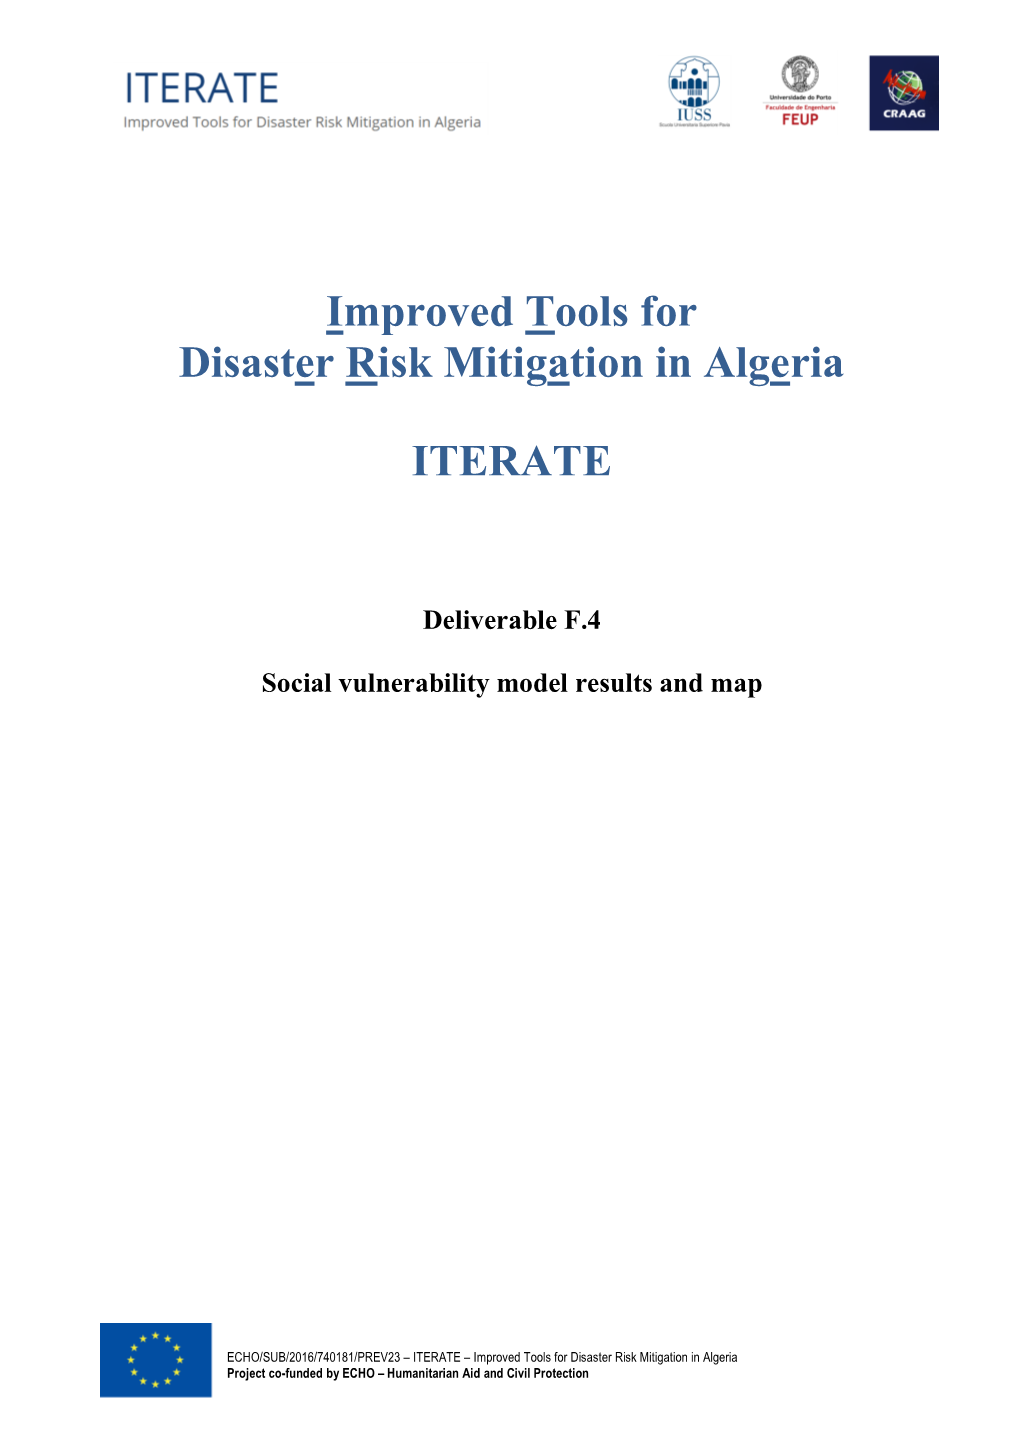 Deliverable F.4 Social Vulnerability Model Results And